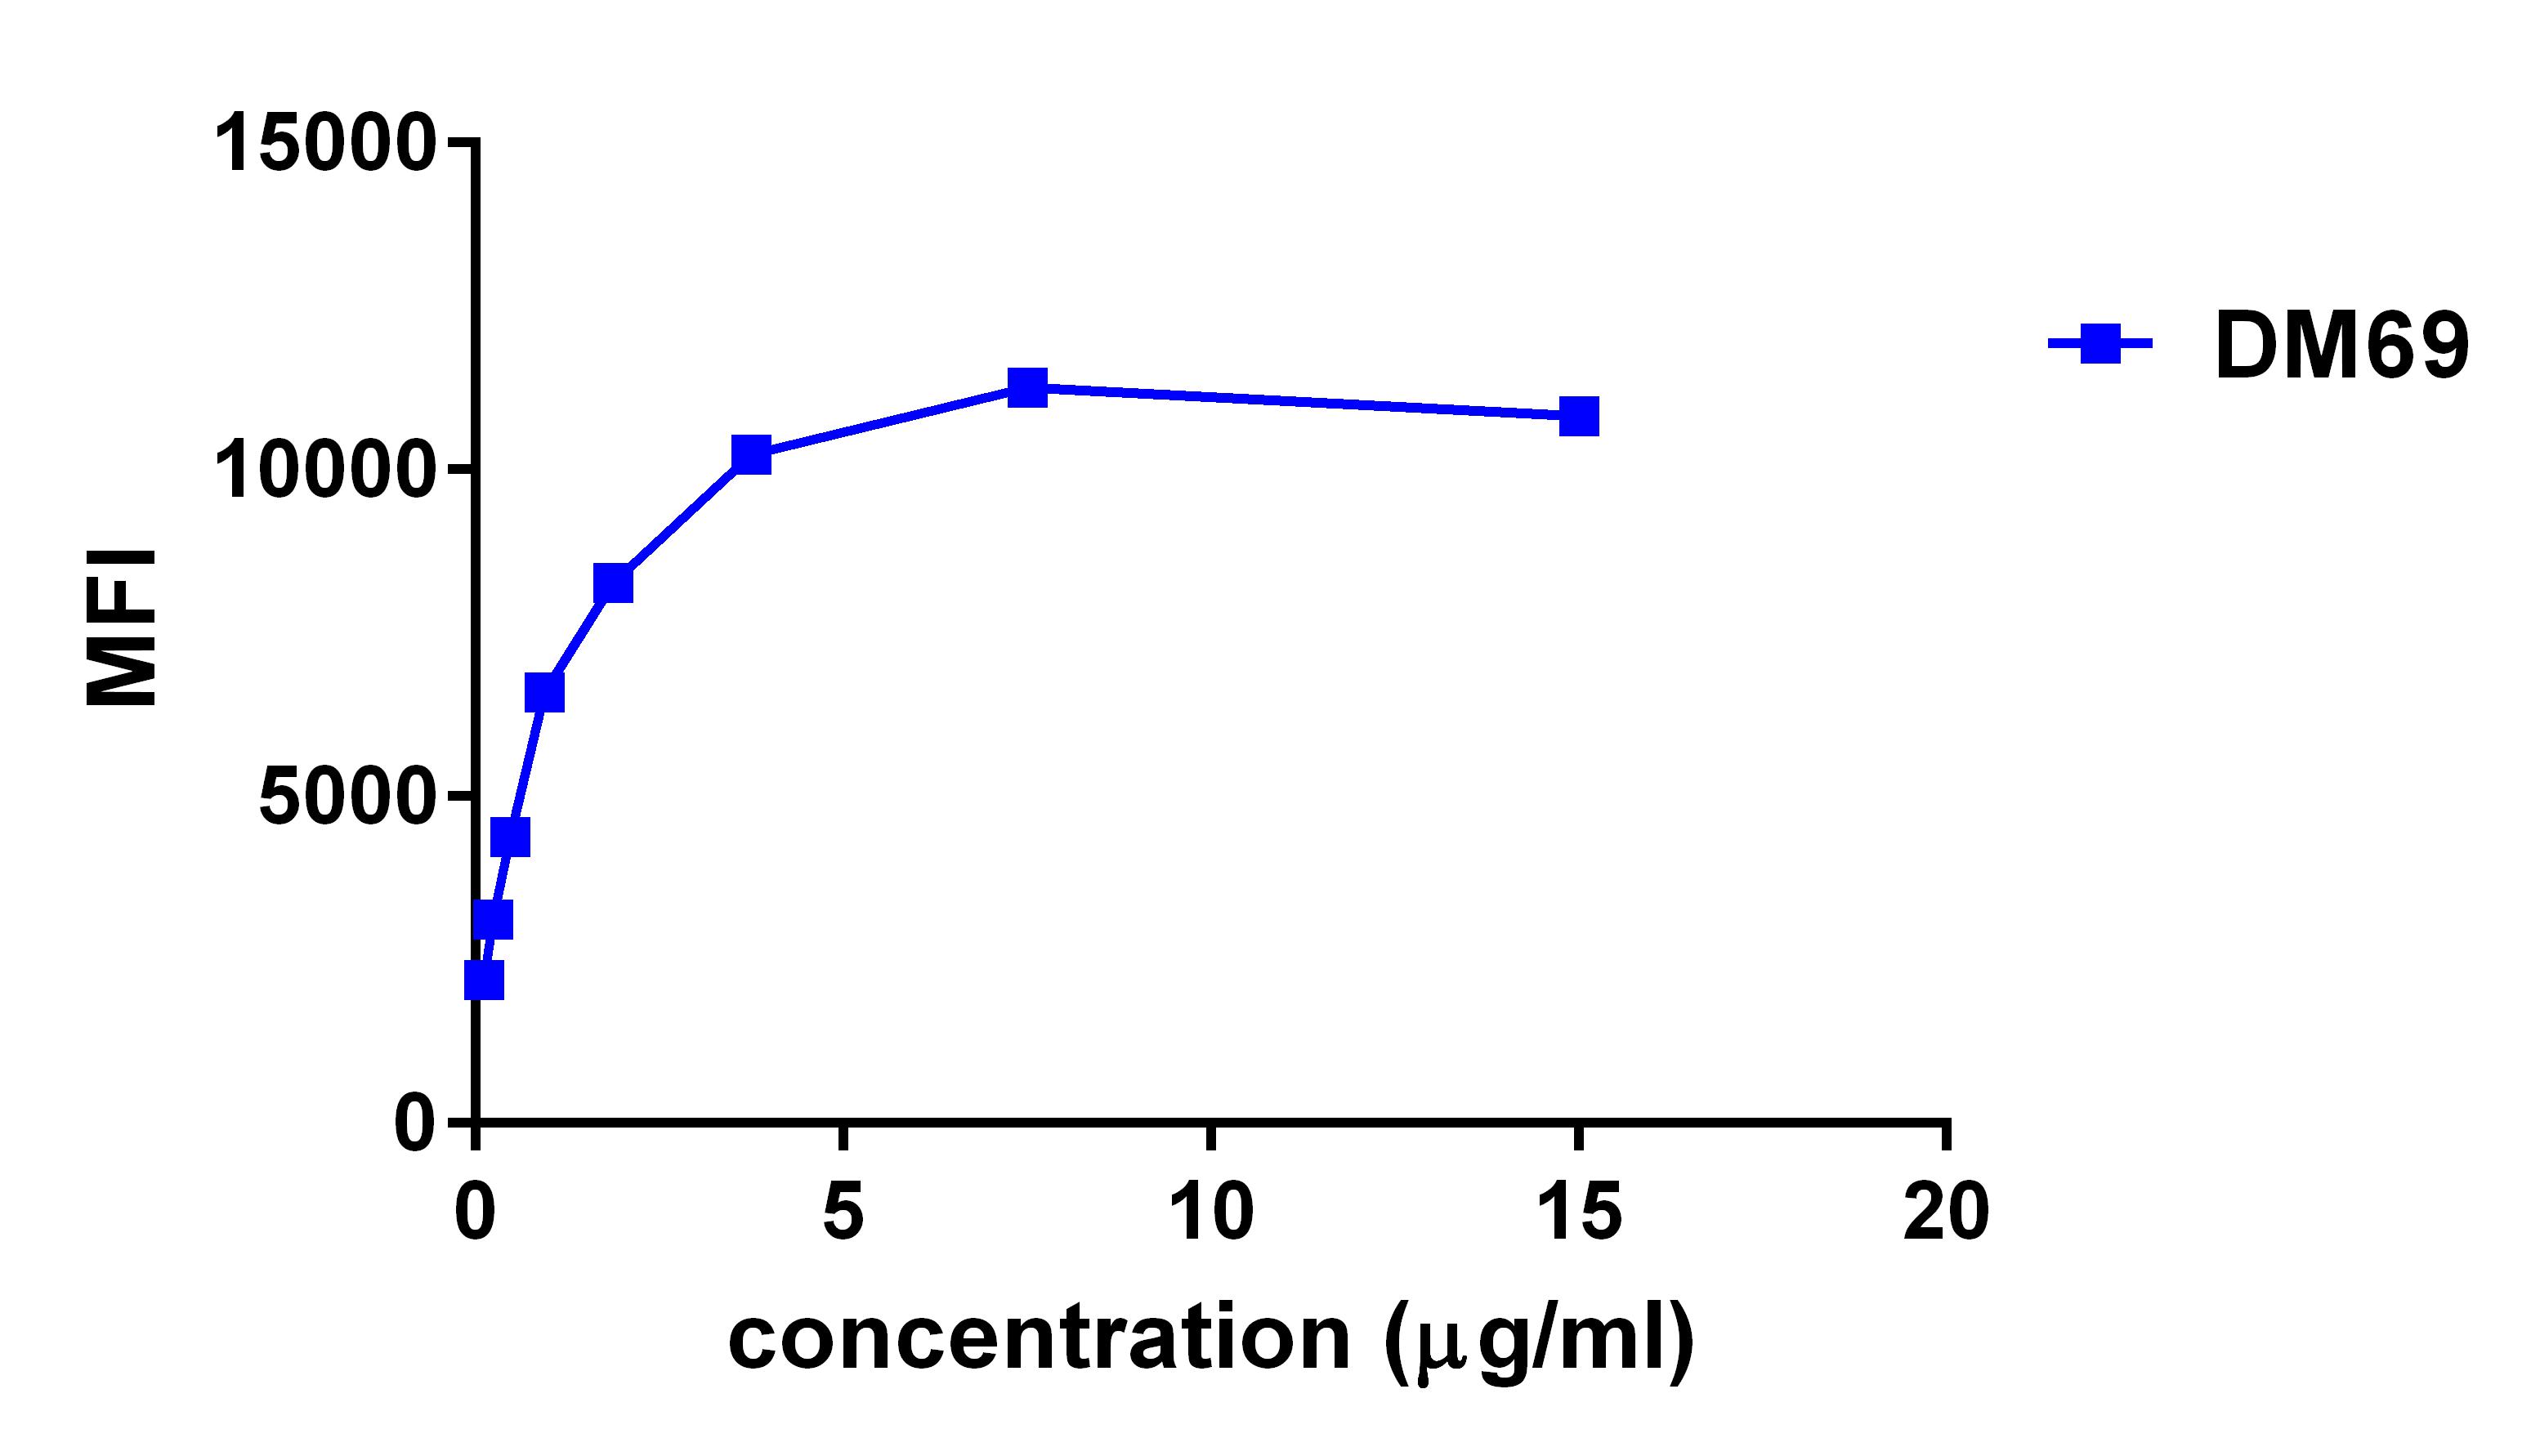 Figure 3. FACS data of serially titrated Rabbit anti-2B4 monoclonal antibody (clone: DM69) on THP-1 cells. The Y-axis represents the mean fluorescence intensity (MFI) while the X-axis represents the concentration of IgG used.